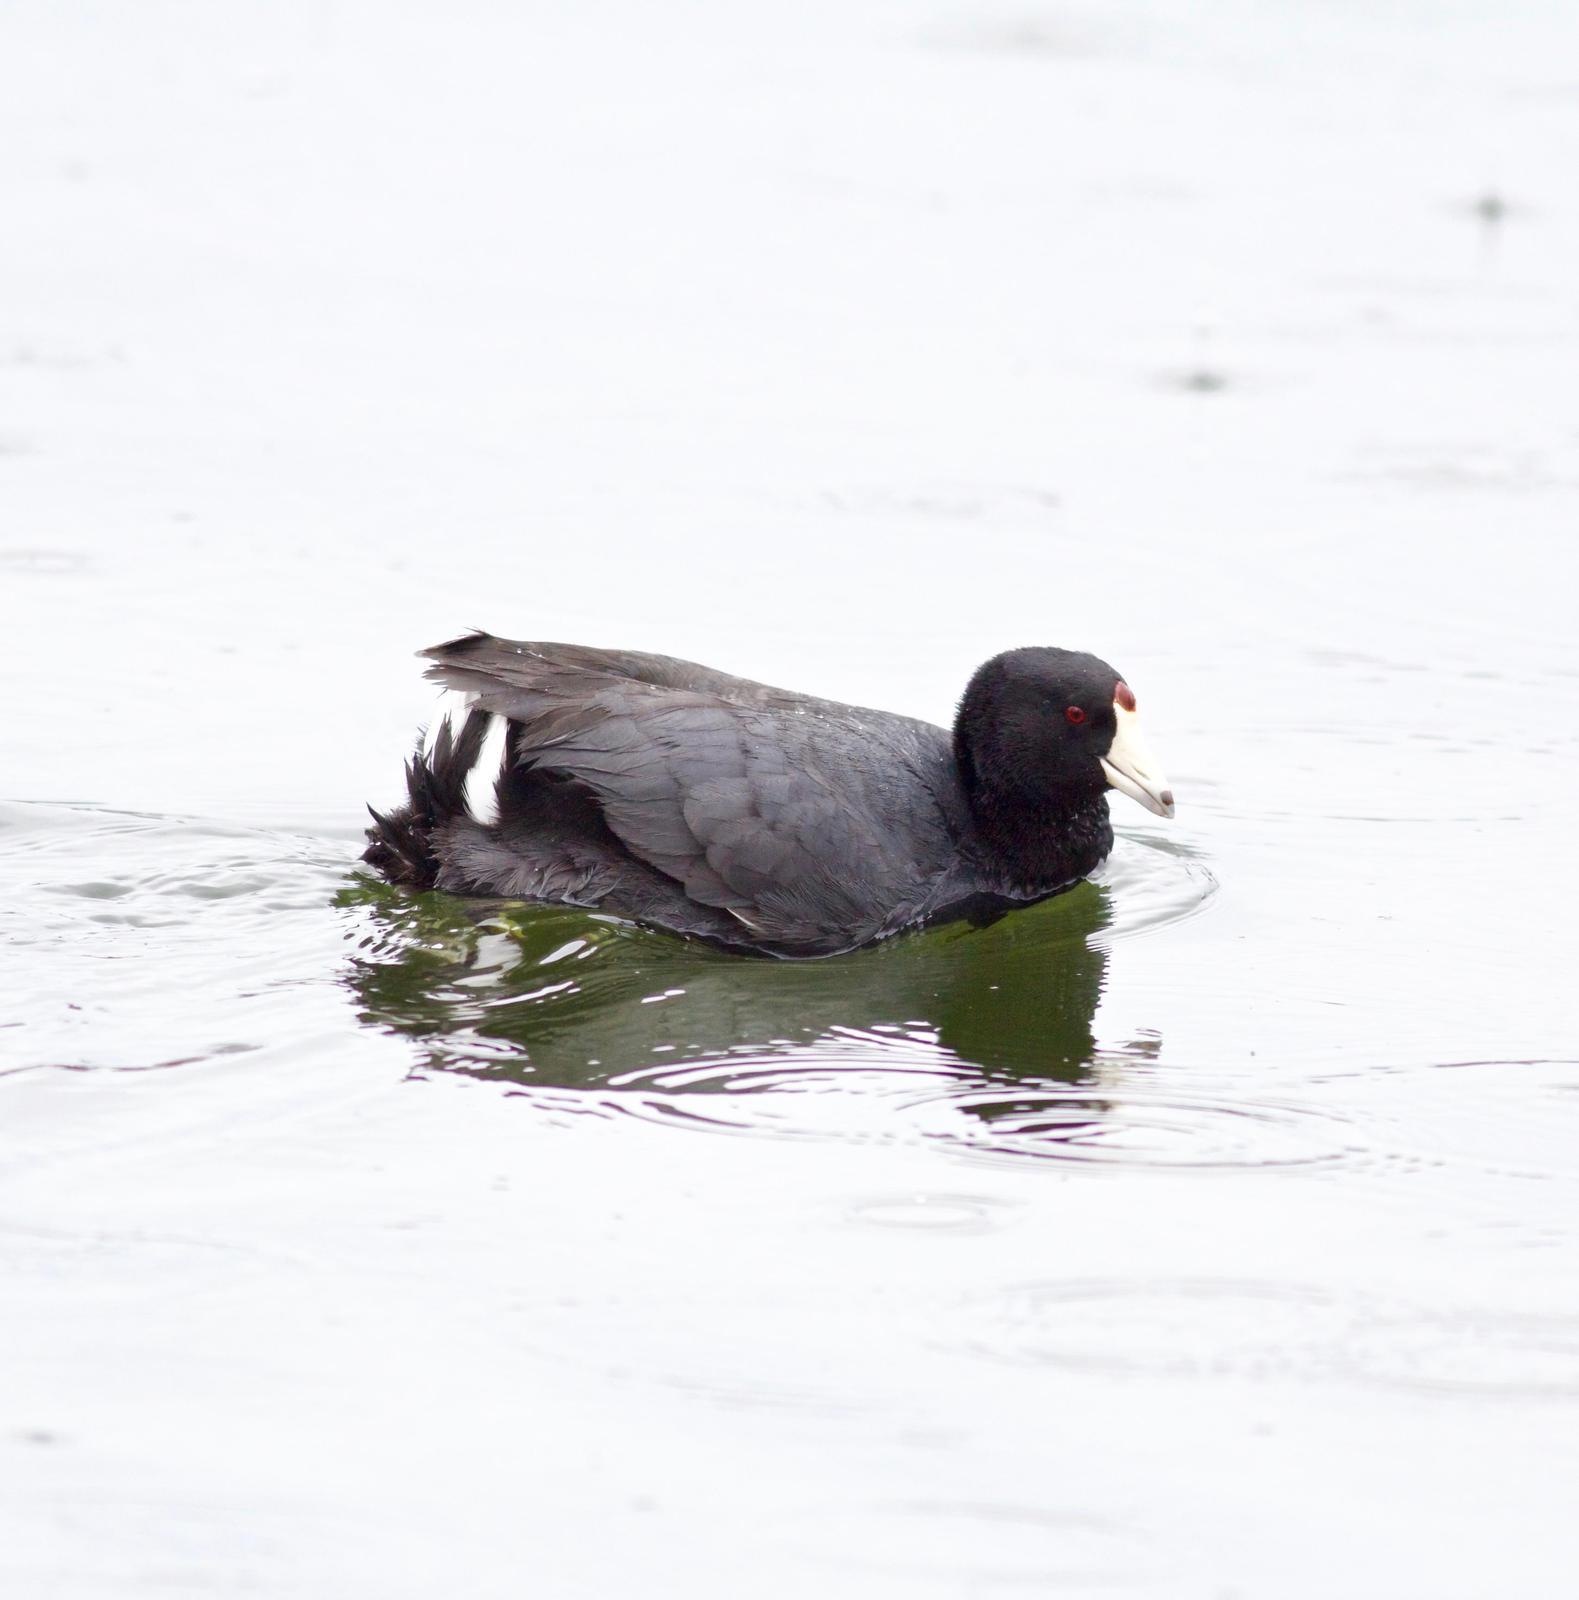 American Coot Photo by Kathryn Keith